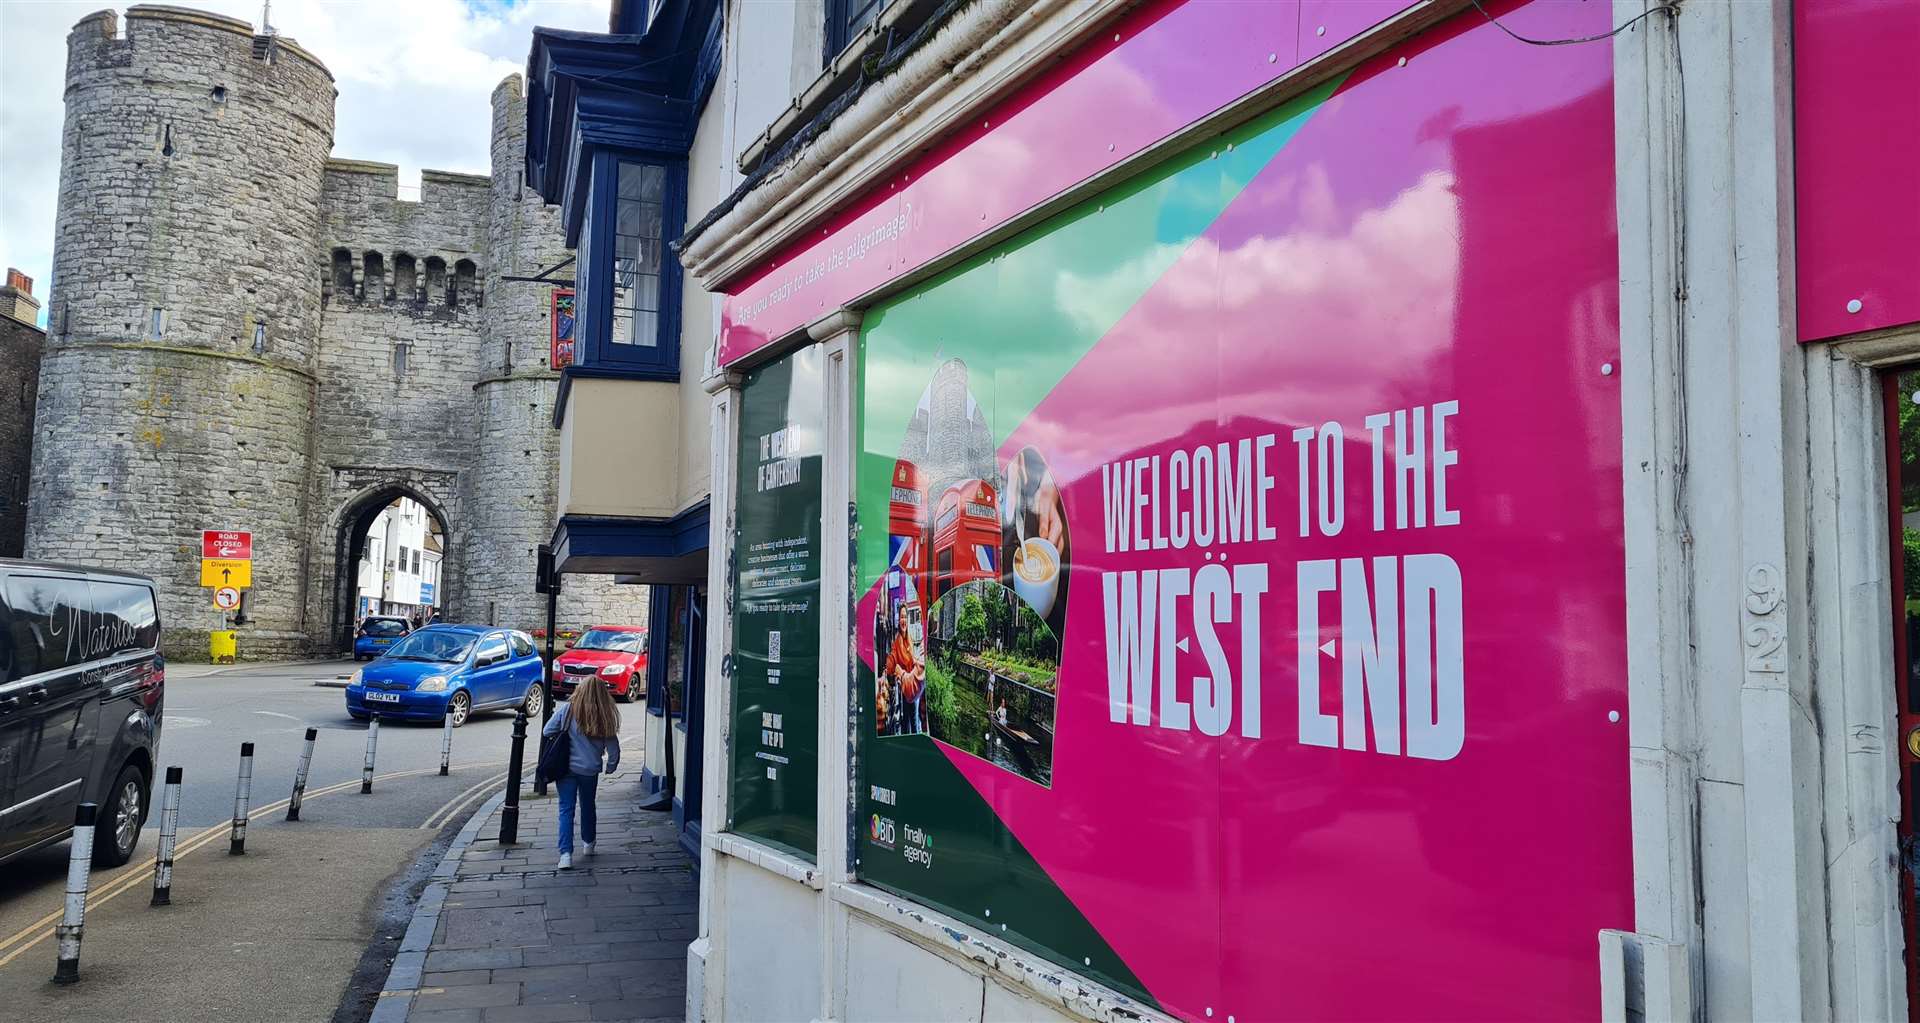 St Dunstan's in Canterbury has been rebranded 'the West End' of the city